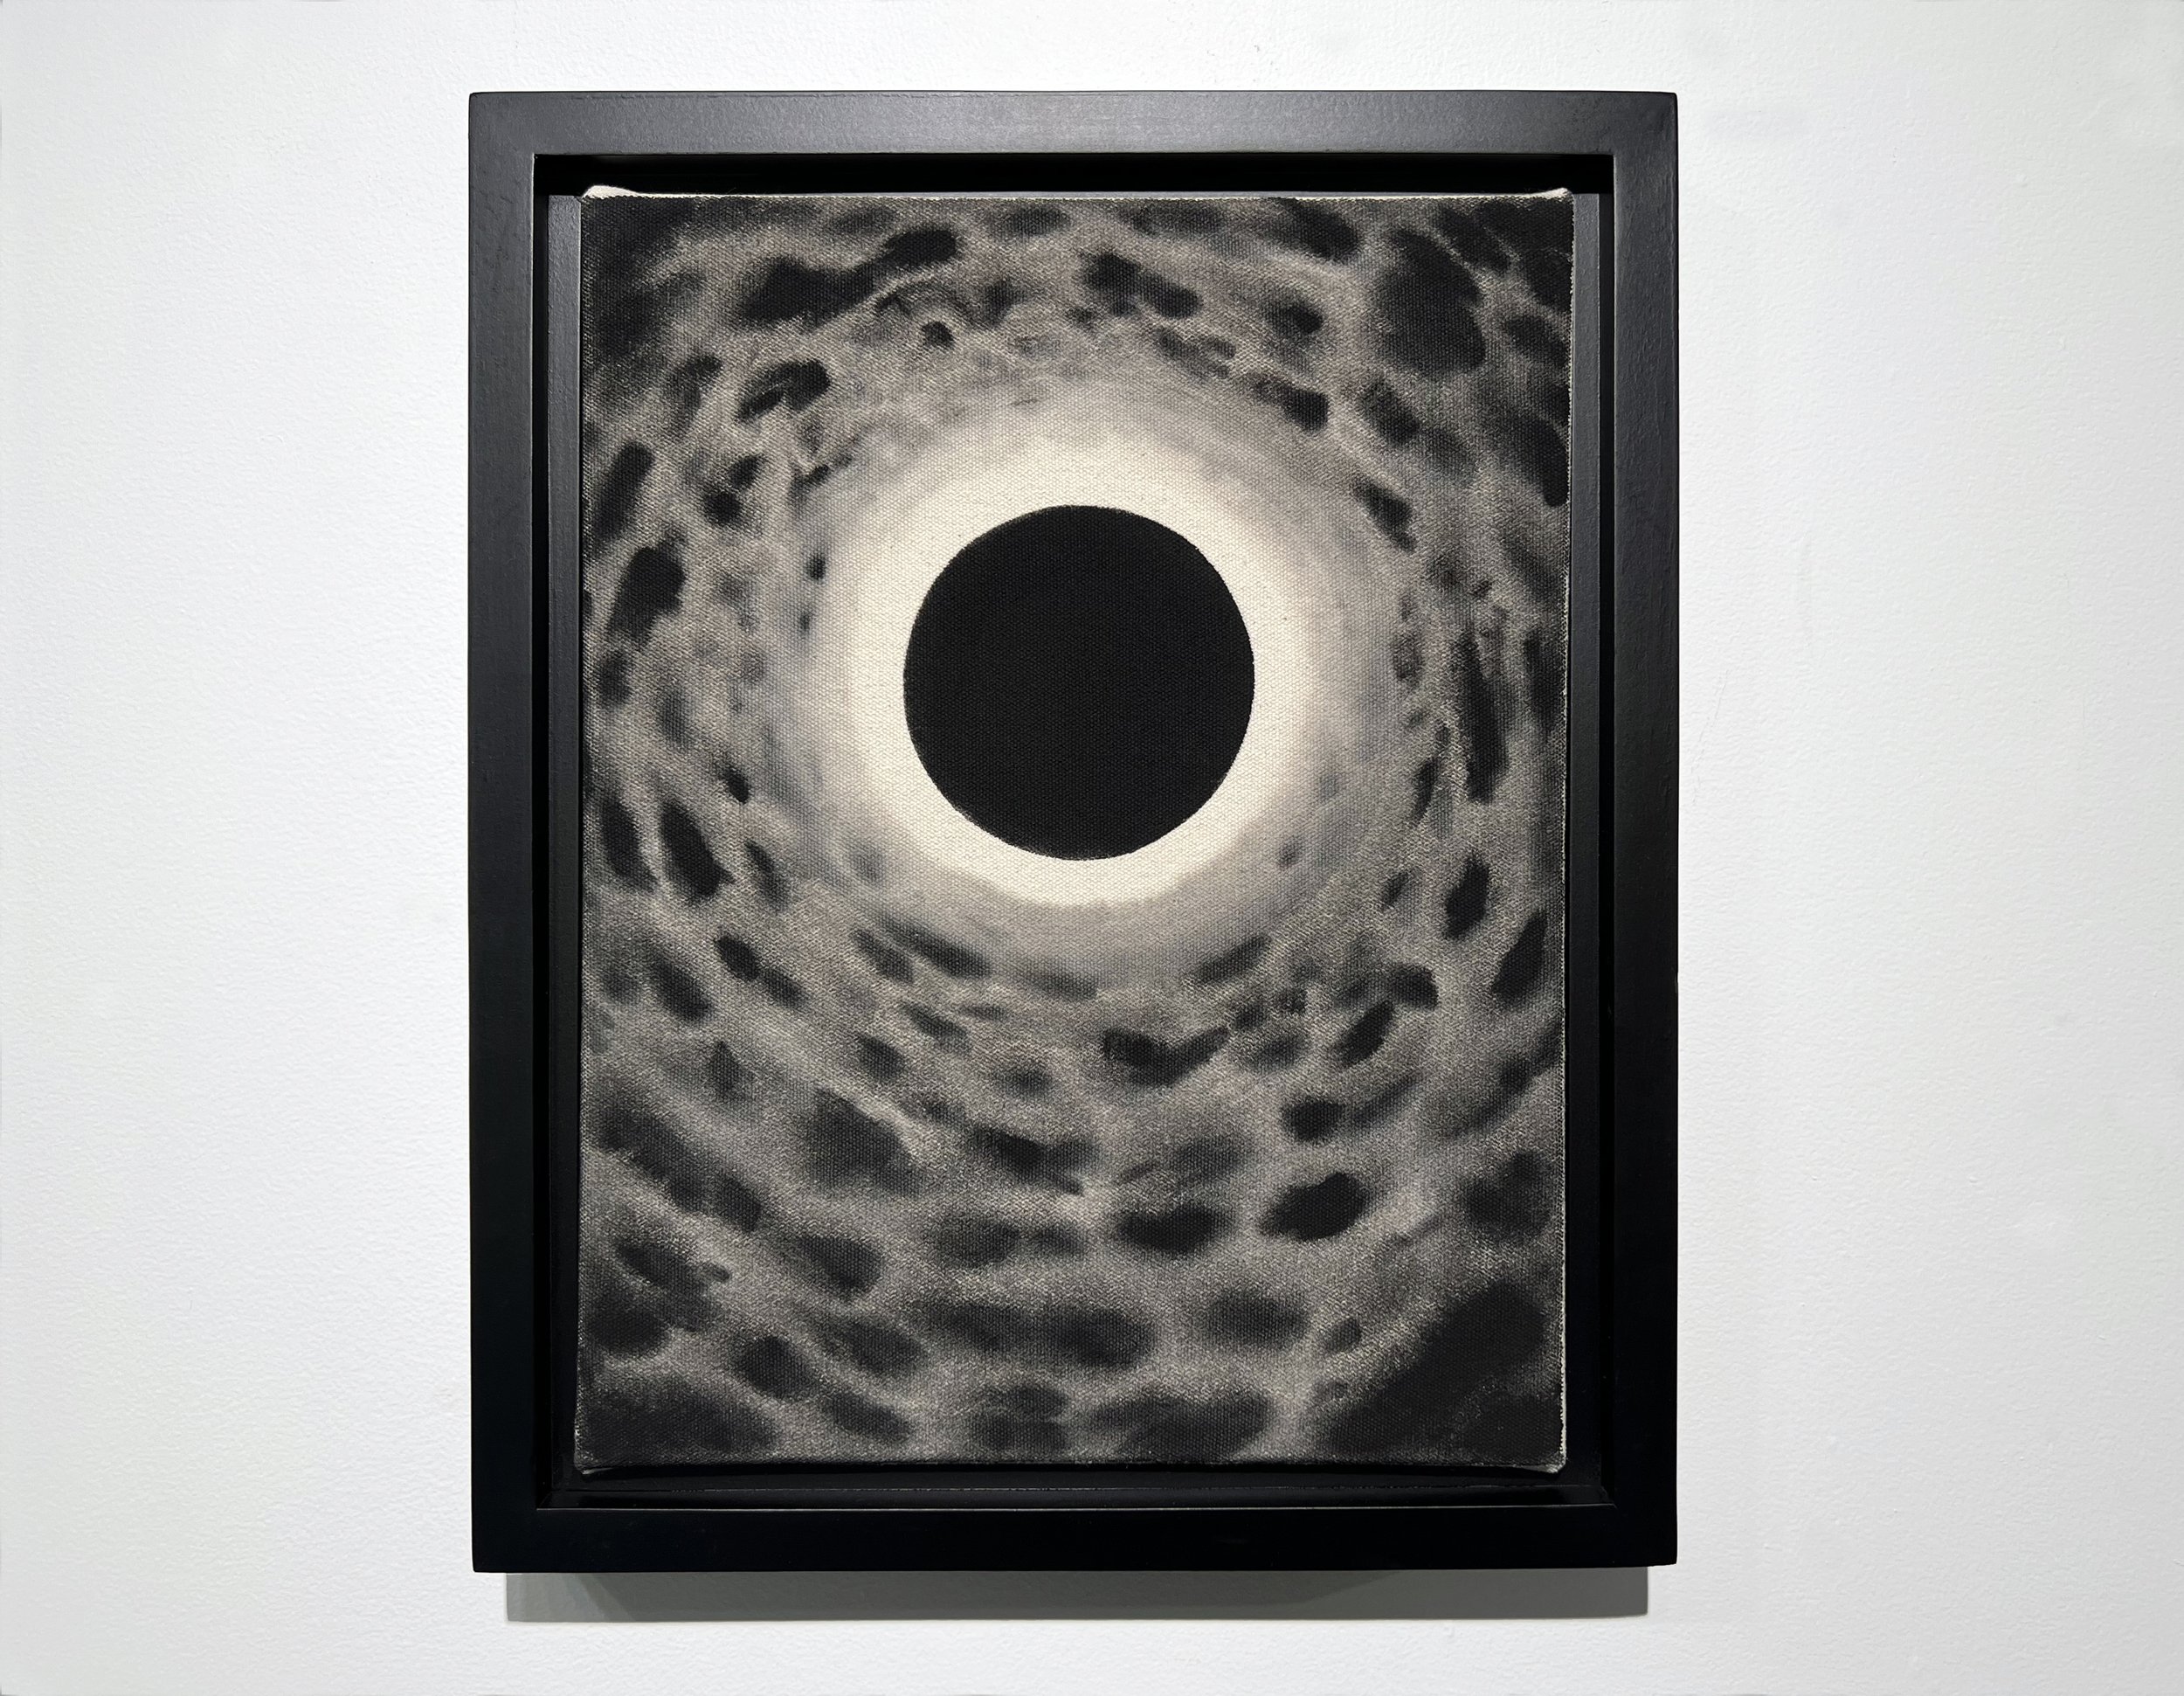   Untitled (black sun) , from Transcendental Series, 2022 Black gesso on raw canvas 11 x 14 inches (28cm x 35.5cm) 